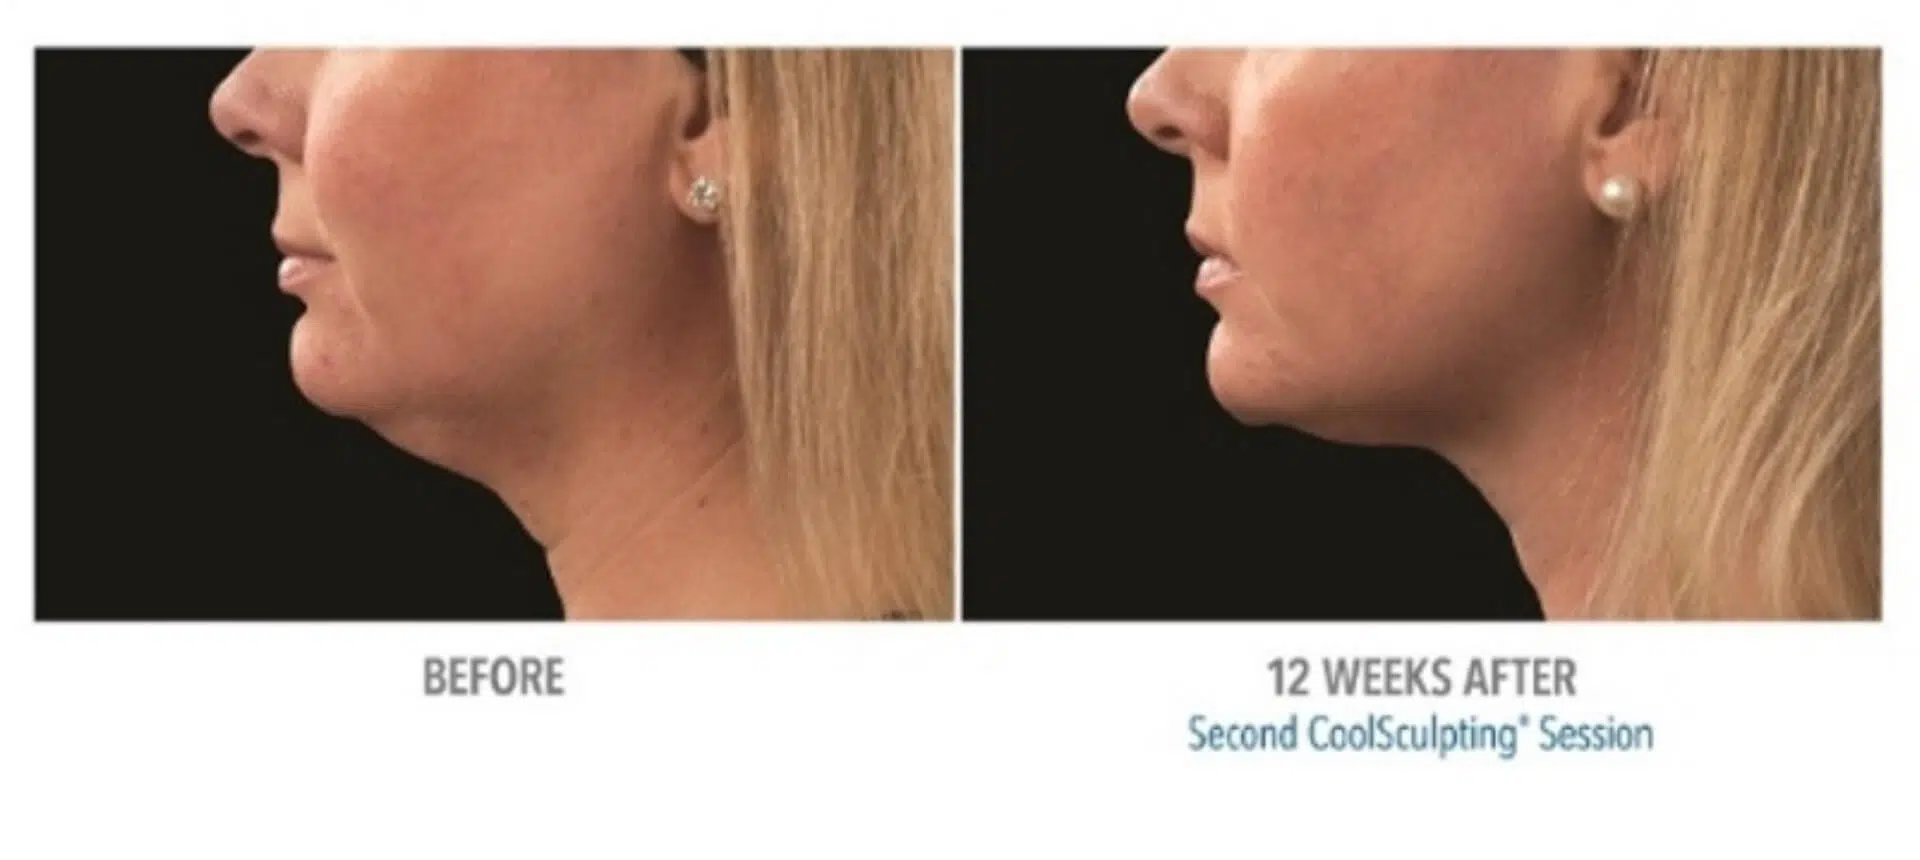 Coolsculpting Before And After Real Patient Results